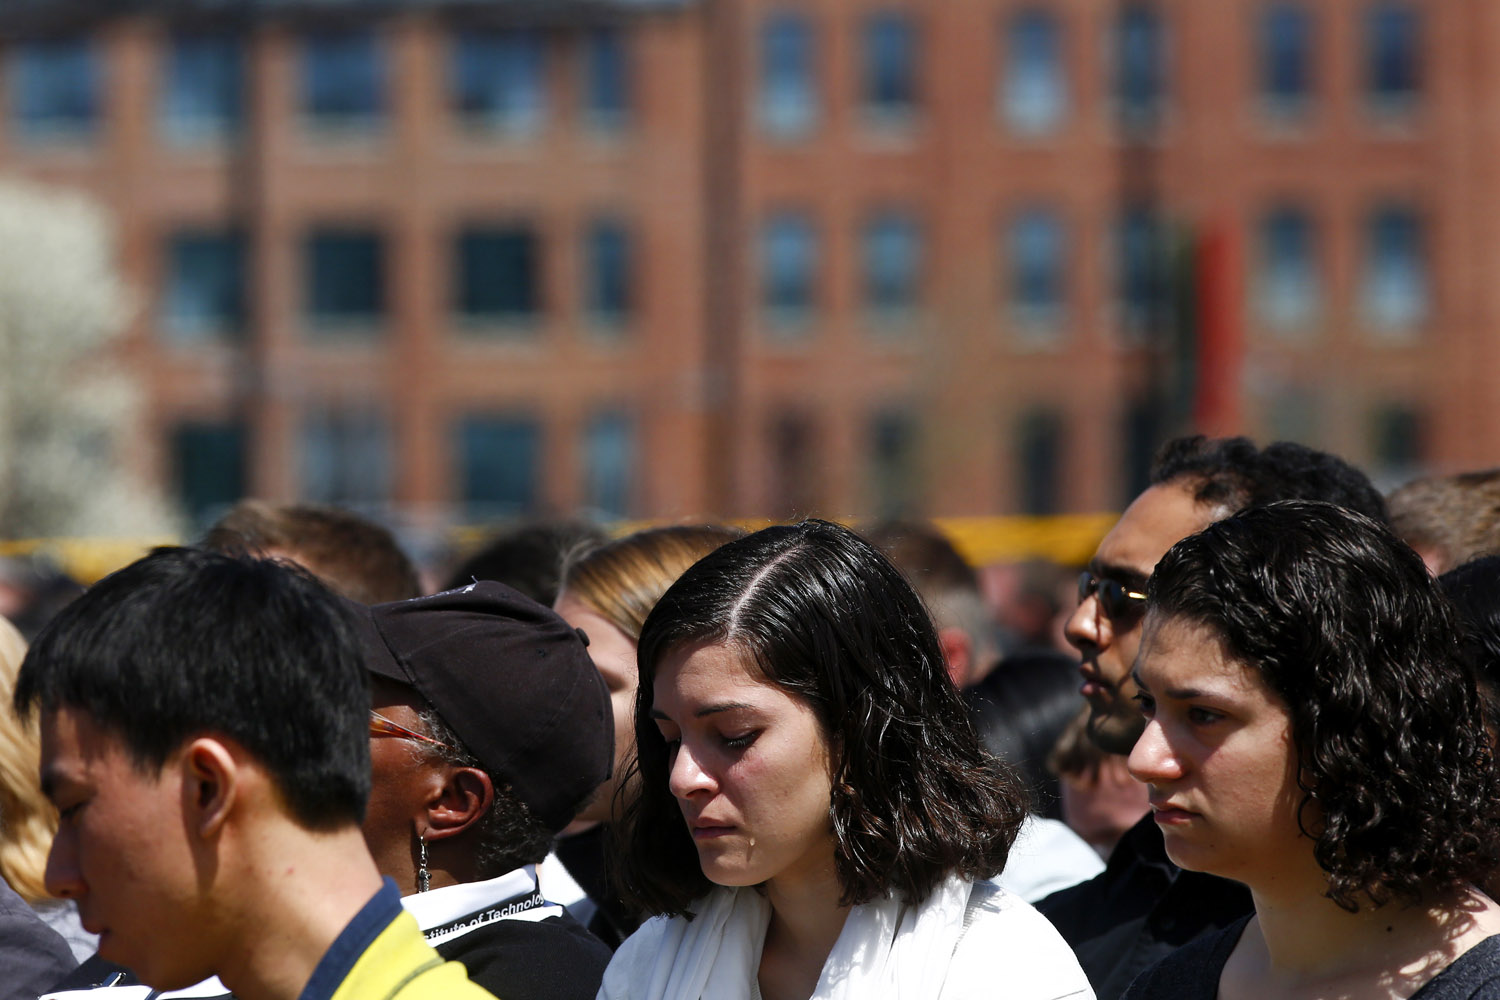 April 23, 2013. A woman cries during a memorial service for Massachusetts Institute of Technology police officer Sean Collier, at Briggs Field on the university's campus in Cambridge.